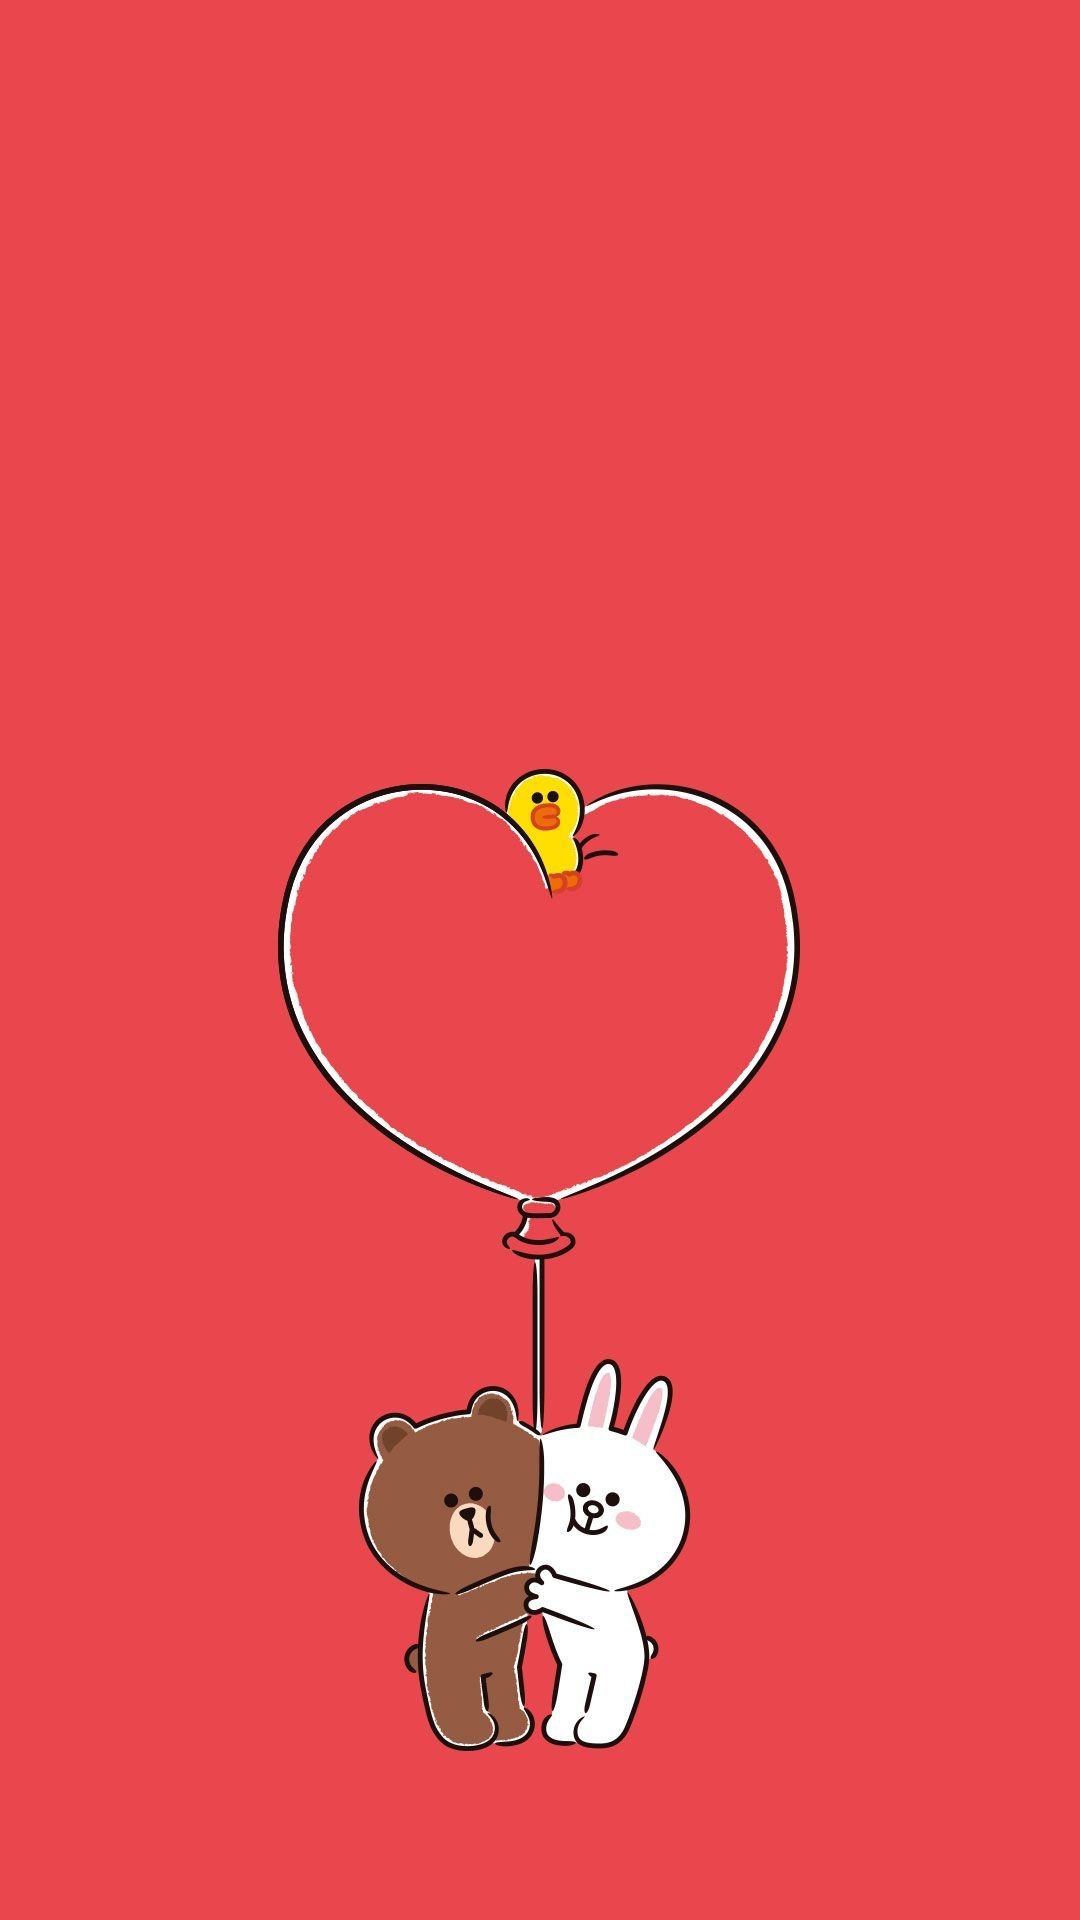 LINEFRIENDS PIC. GIFs, pics and wallpaper by LINE friends. Line friends, Friends wallpaper, Cute cartoon wallpaper